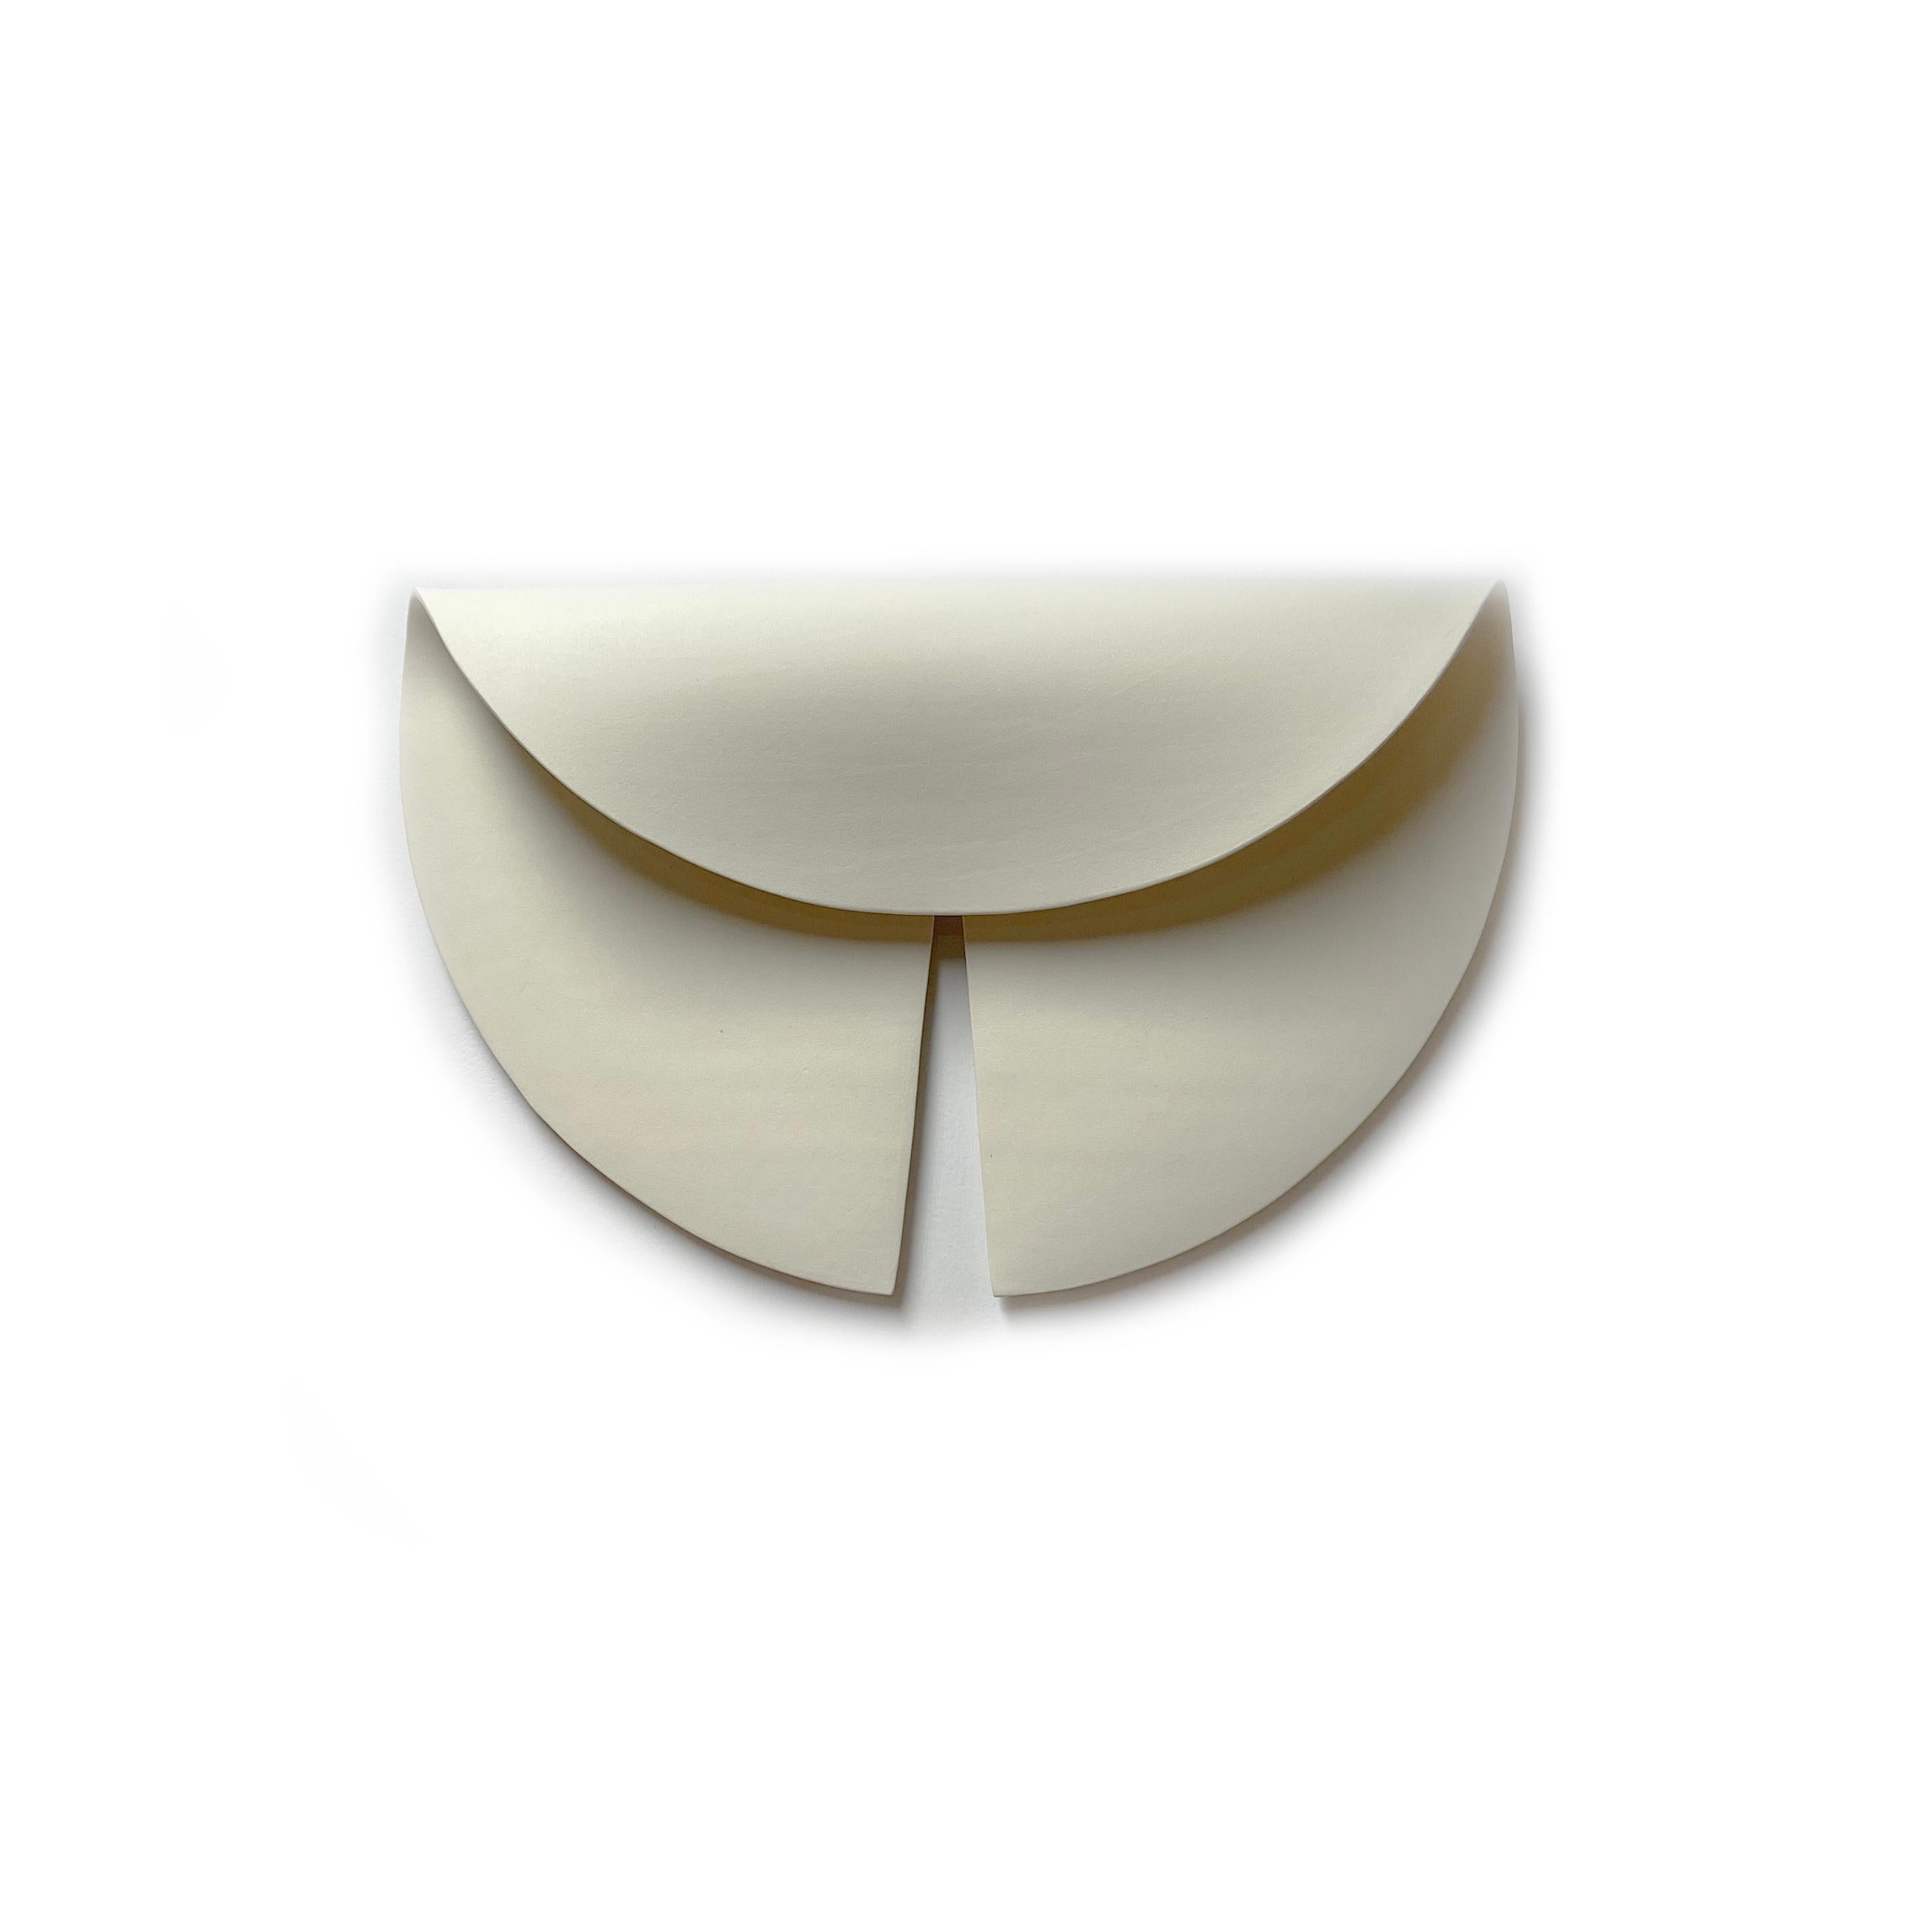 
Ceramic Wall Sculpture

19” x 12” x 4”

matte white glaze over white earthenware

2023

mounting bracket attached on reverse

please see Sconces for the wired, illuminated leaf of the same design.

contact for tearsheet